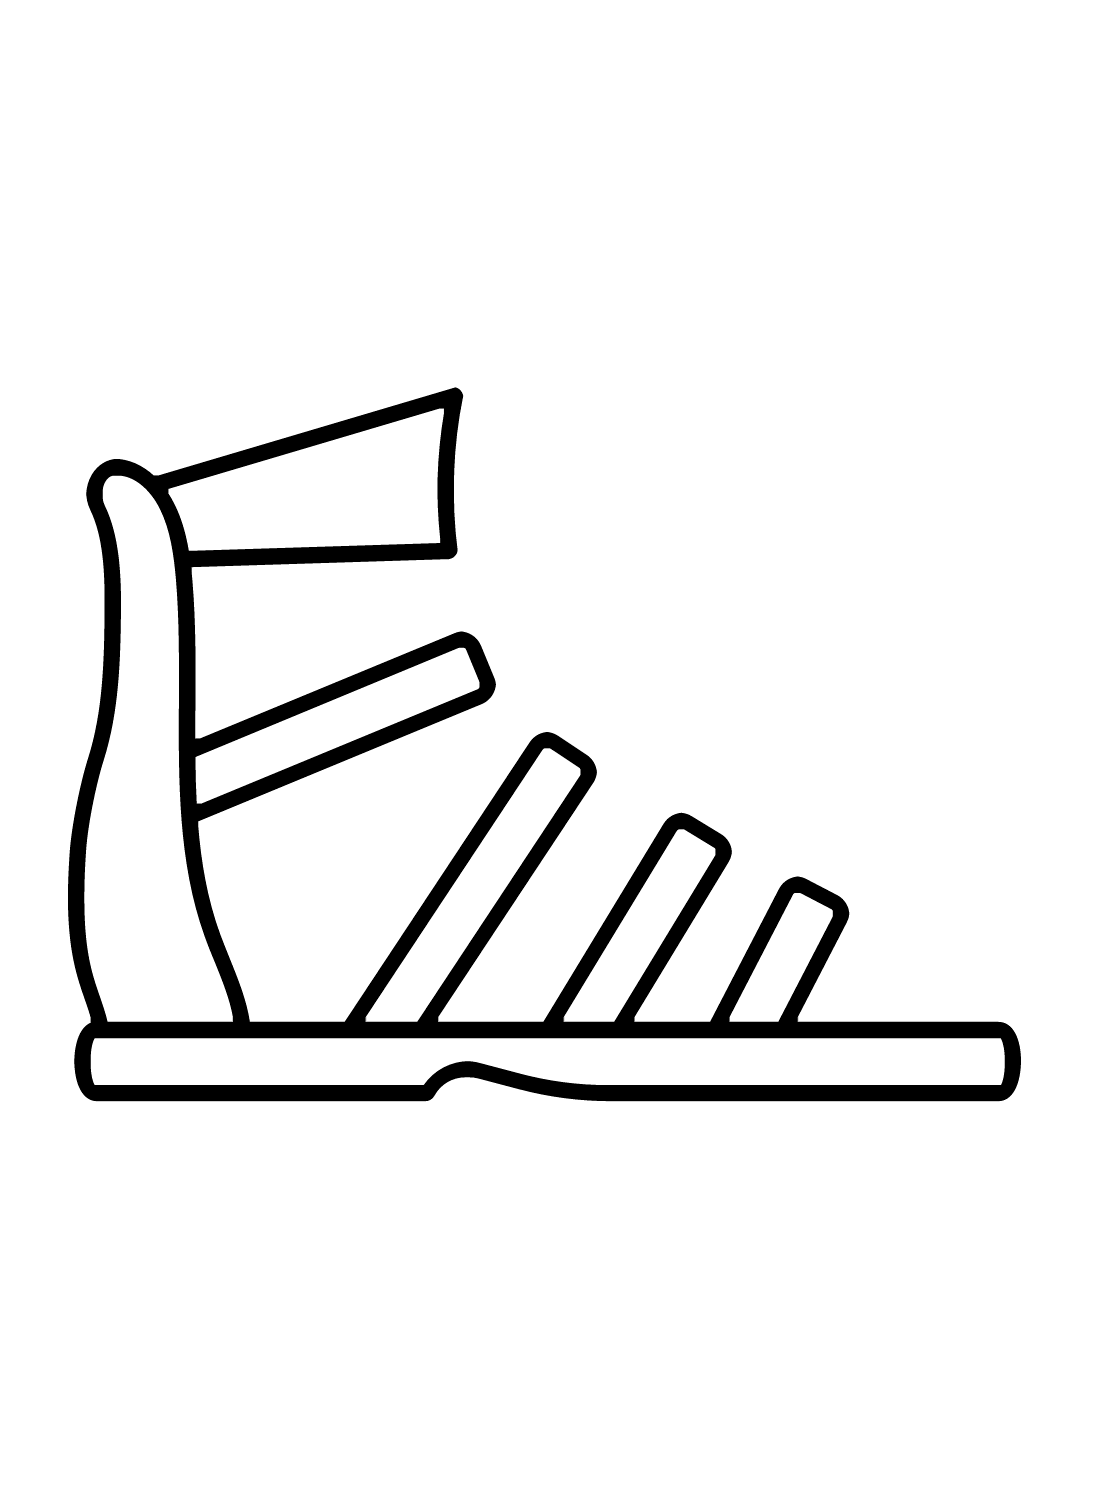 Drawing Sandals Coloring Page